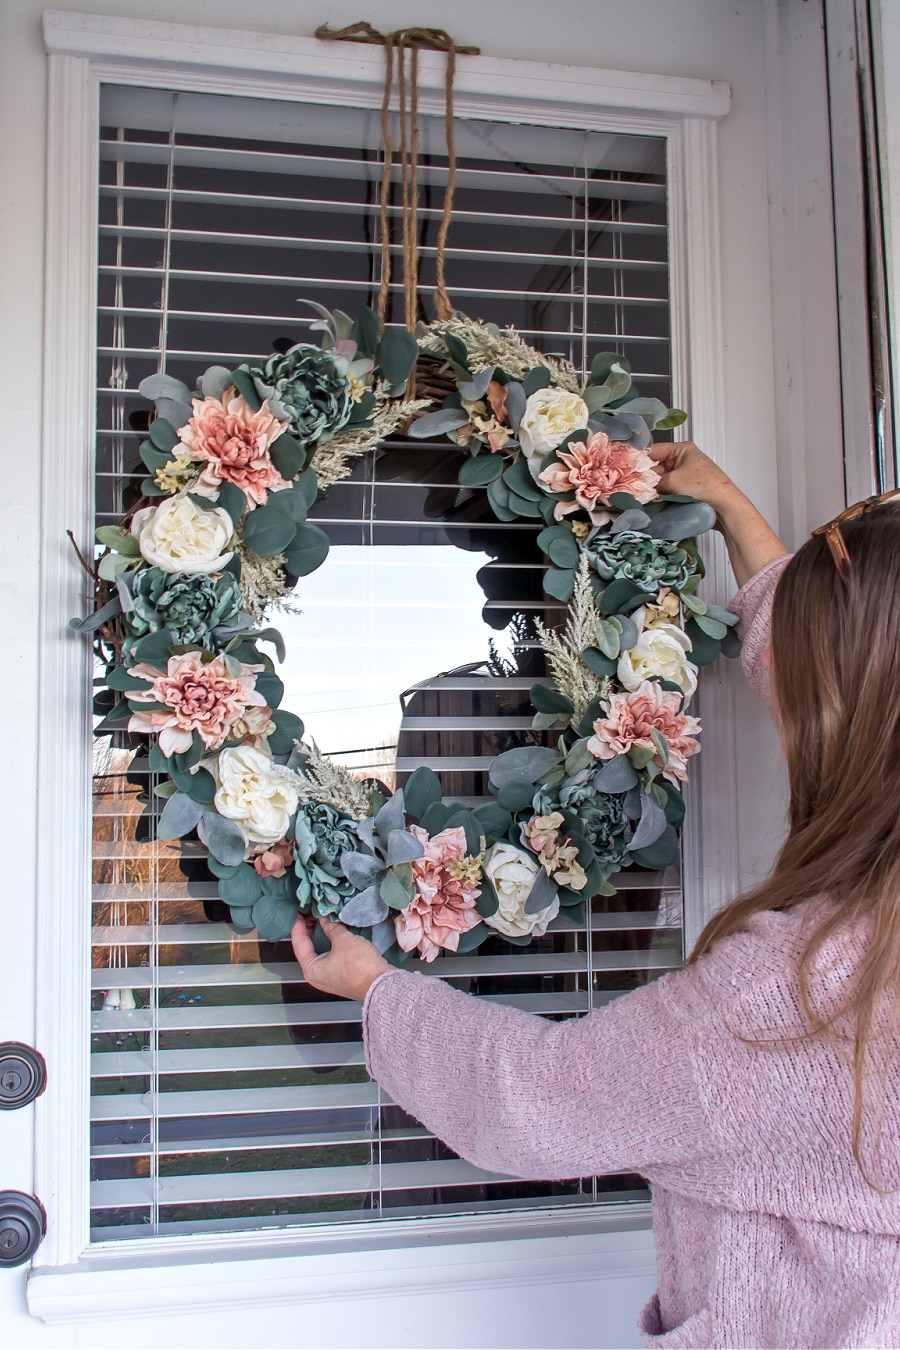 A diy floral wreath with dusty pink, blue, and white flowers.